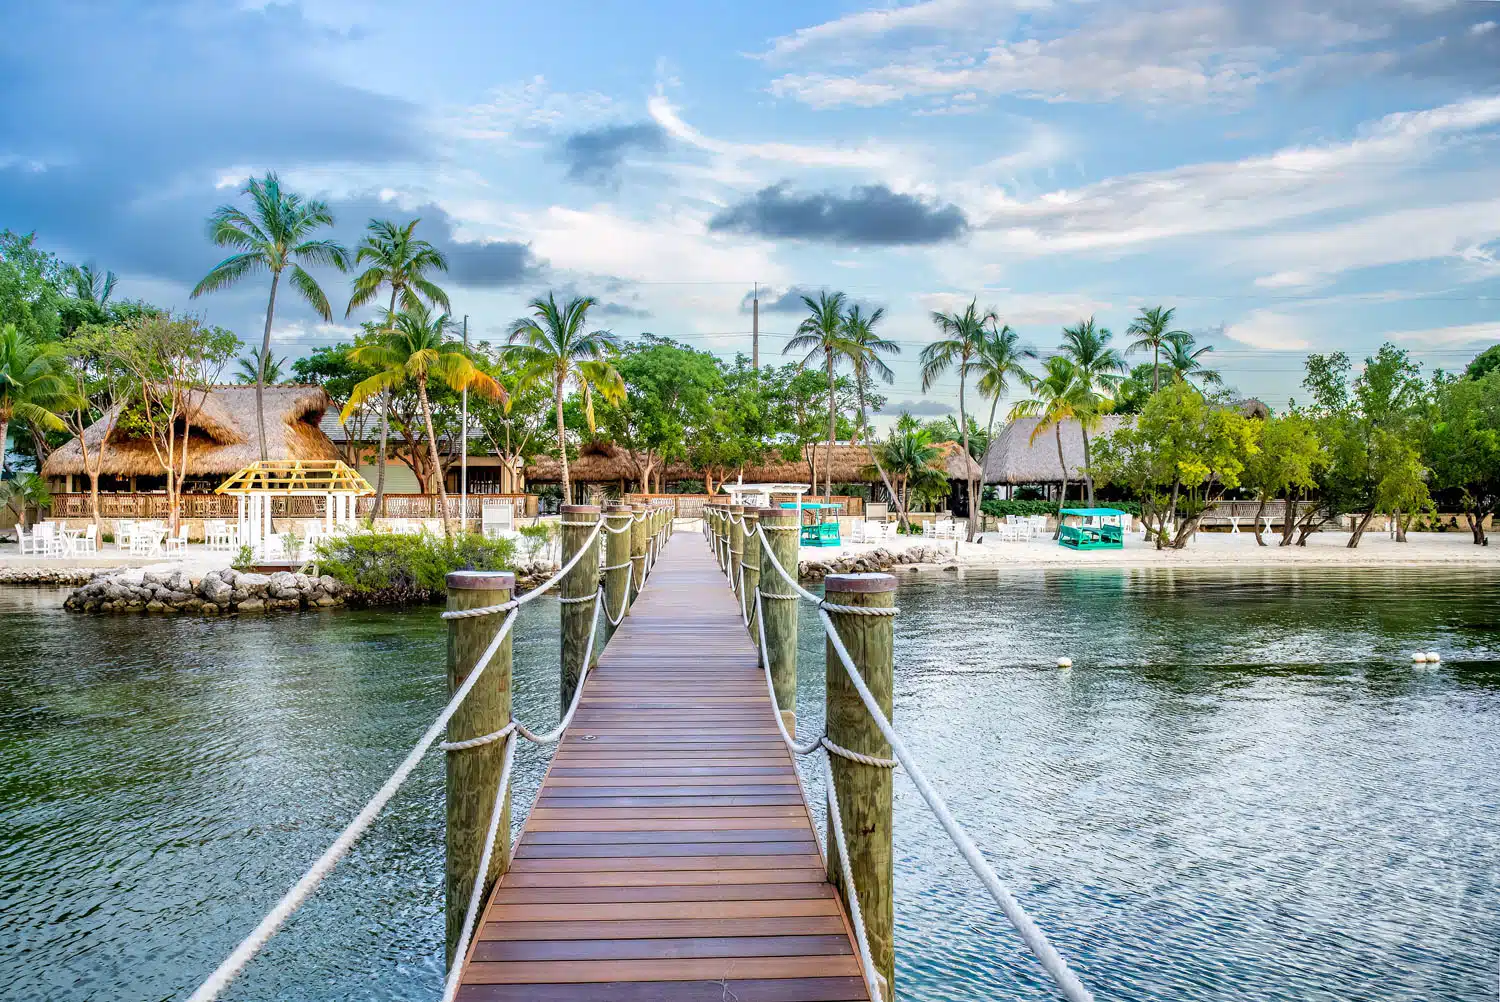 Marker 88 | Things to Do in the Florida Keys